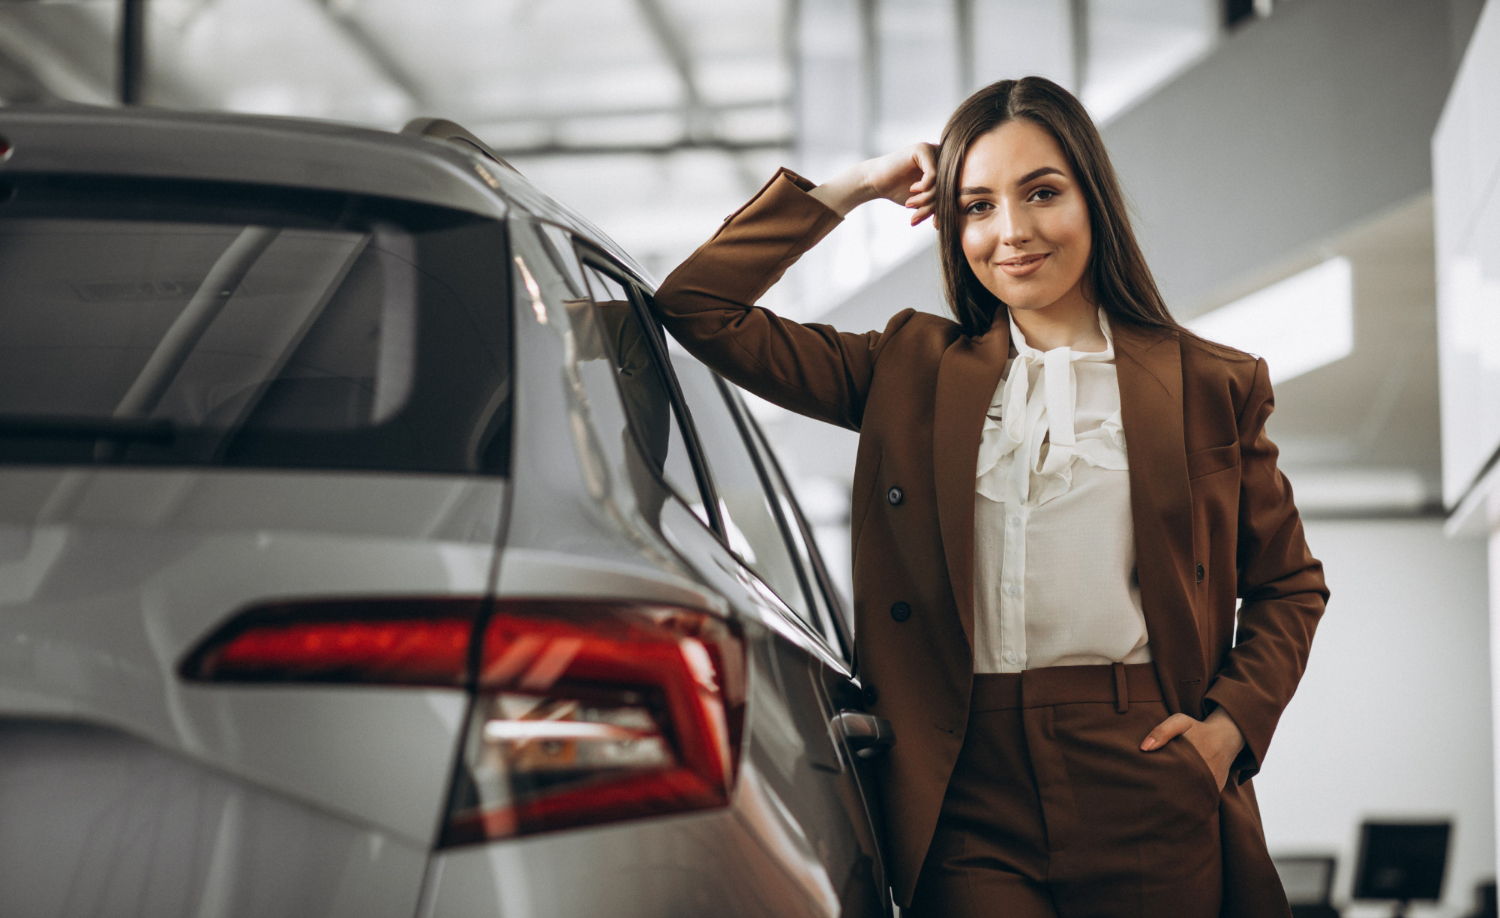 If you have a new car in your hands, take a look at the complete car warranty. Source: Freepik.